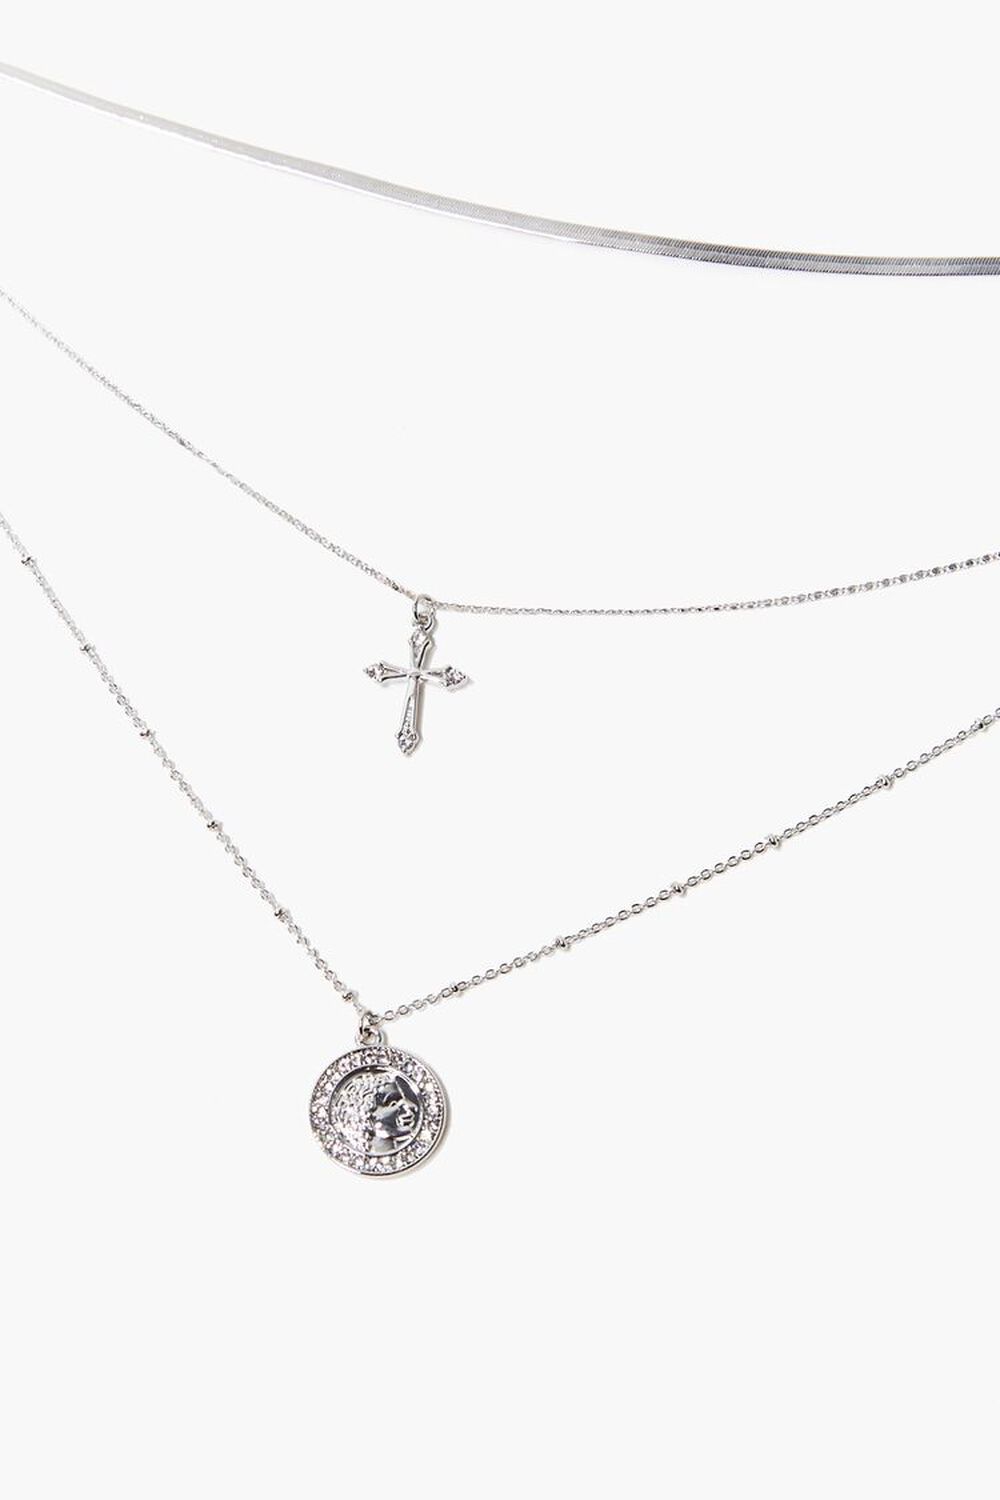 SILVER Coin Pendant & Cross Charm Layered Necklace, image 1